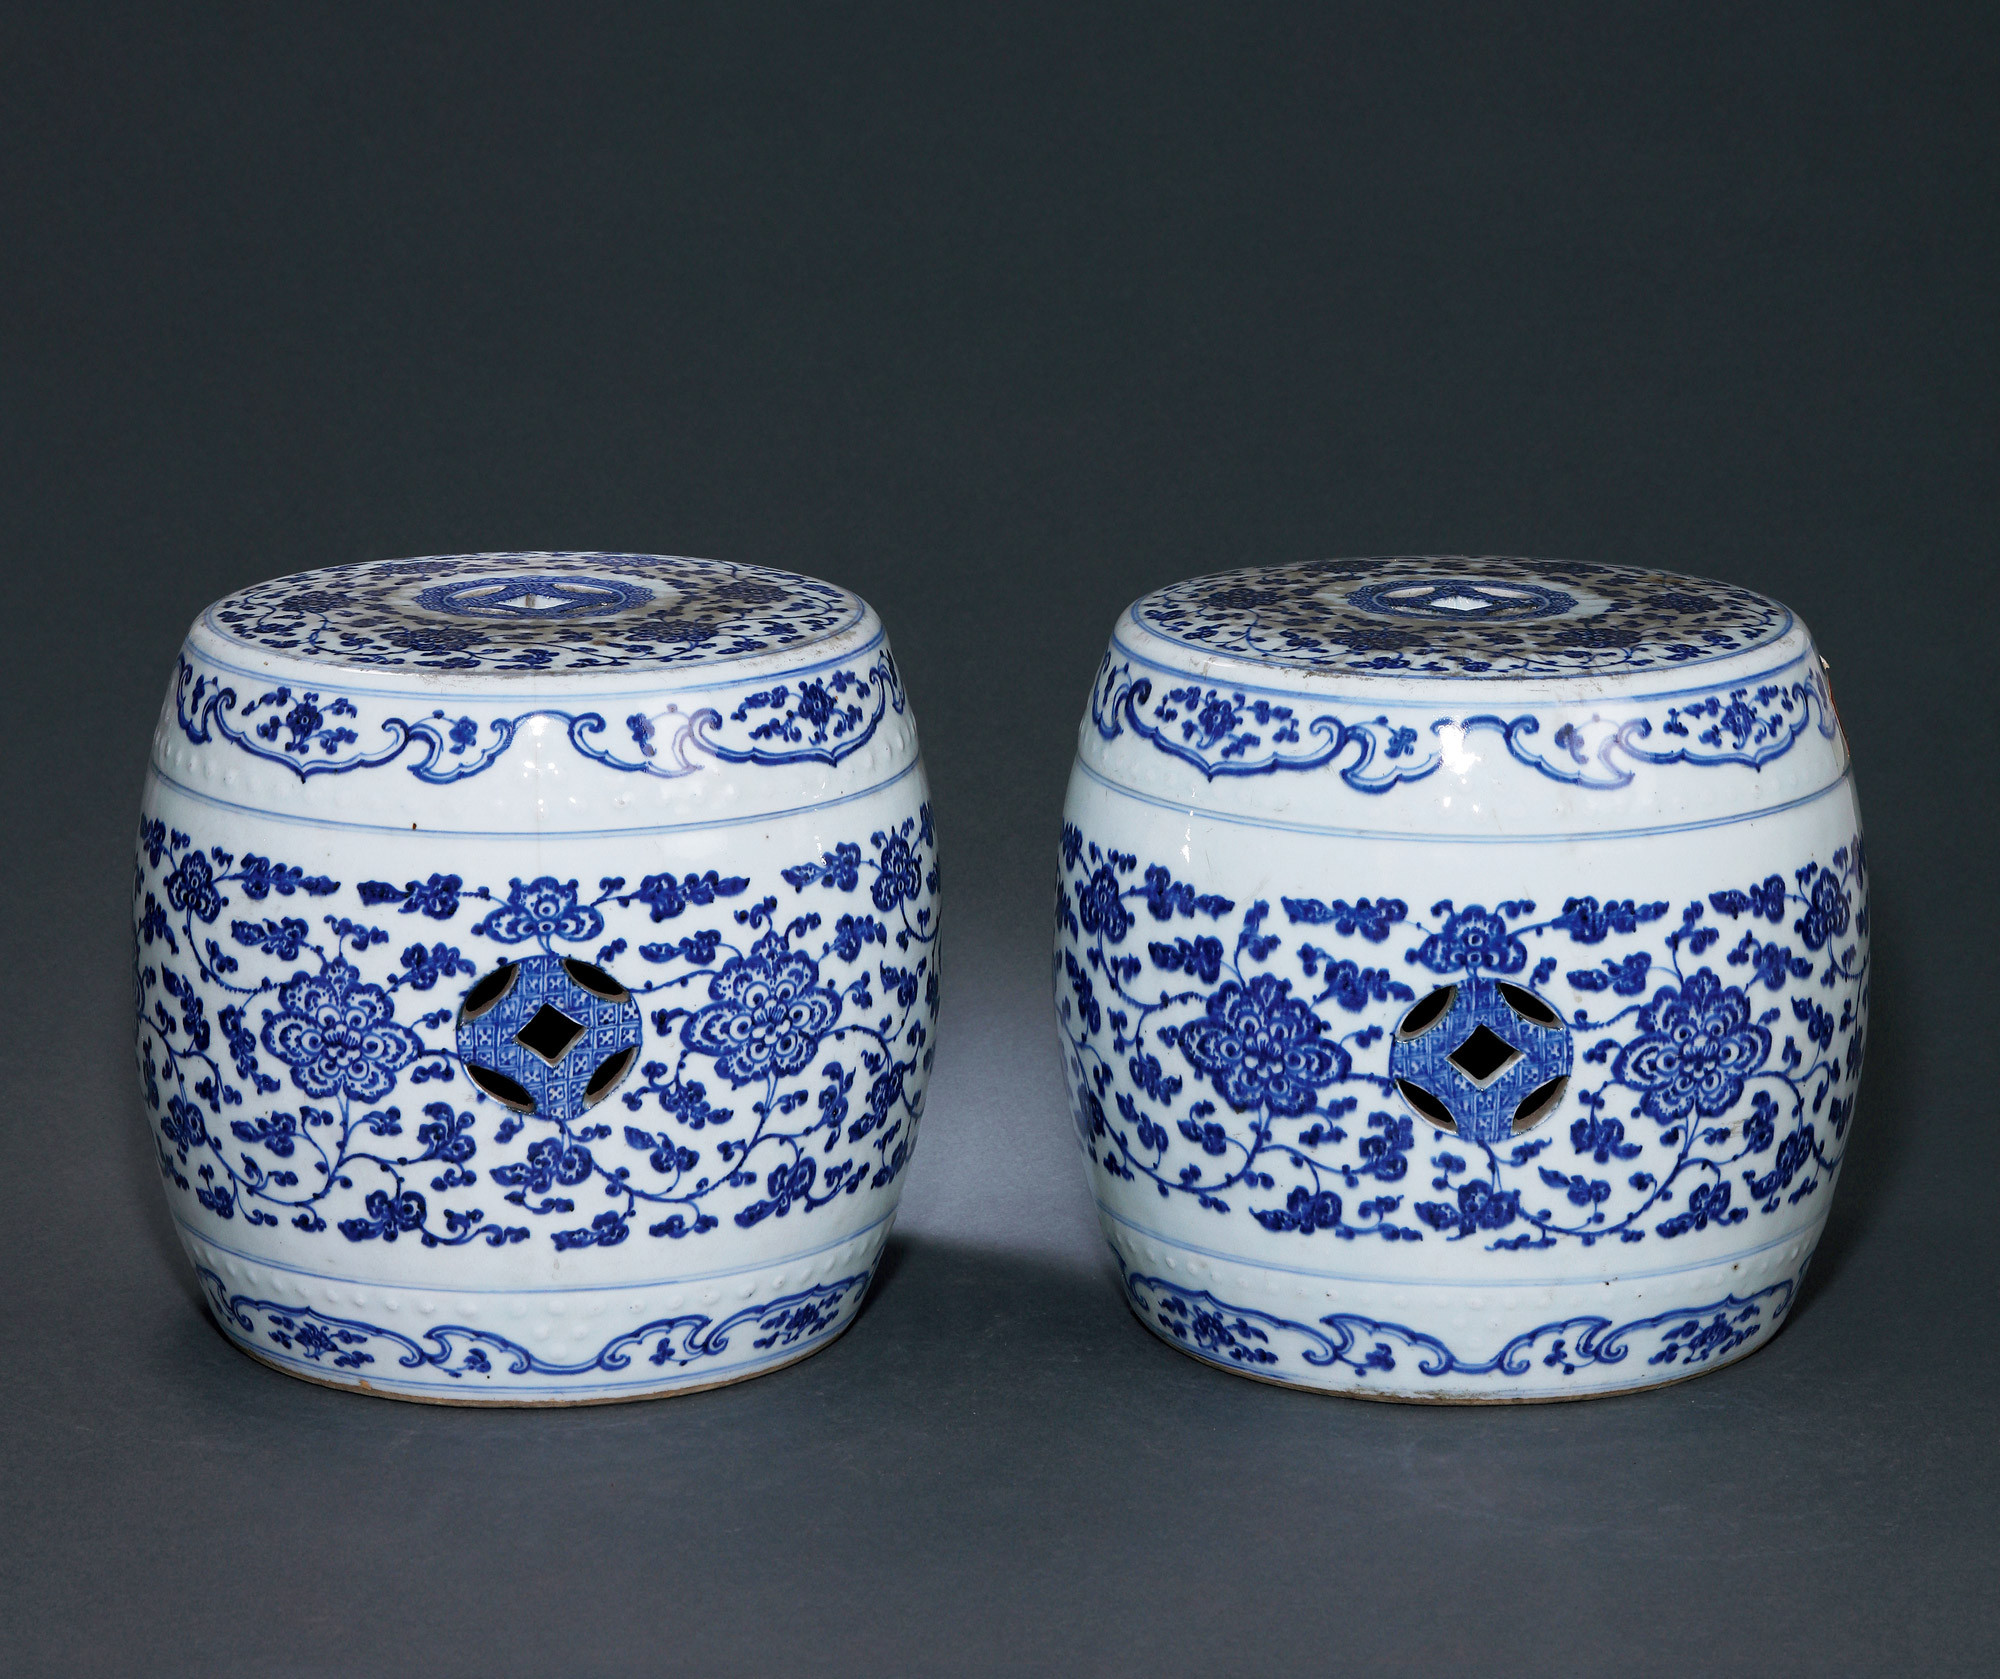 A PAIR OF BLUE AND WHITE STOOL WITH FLOWER DESIGN